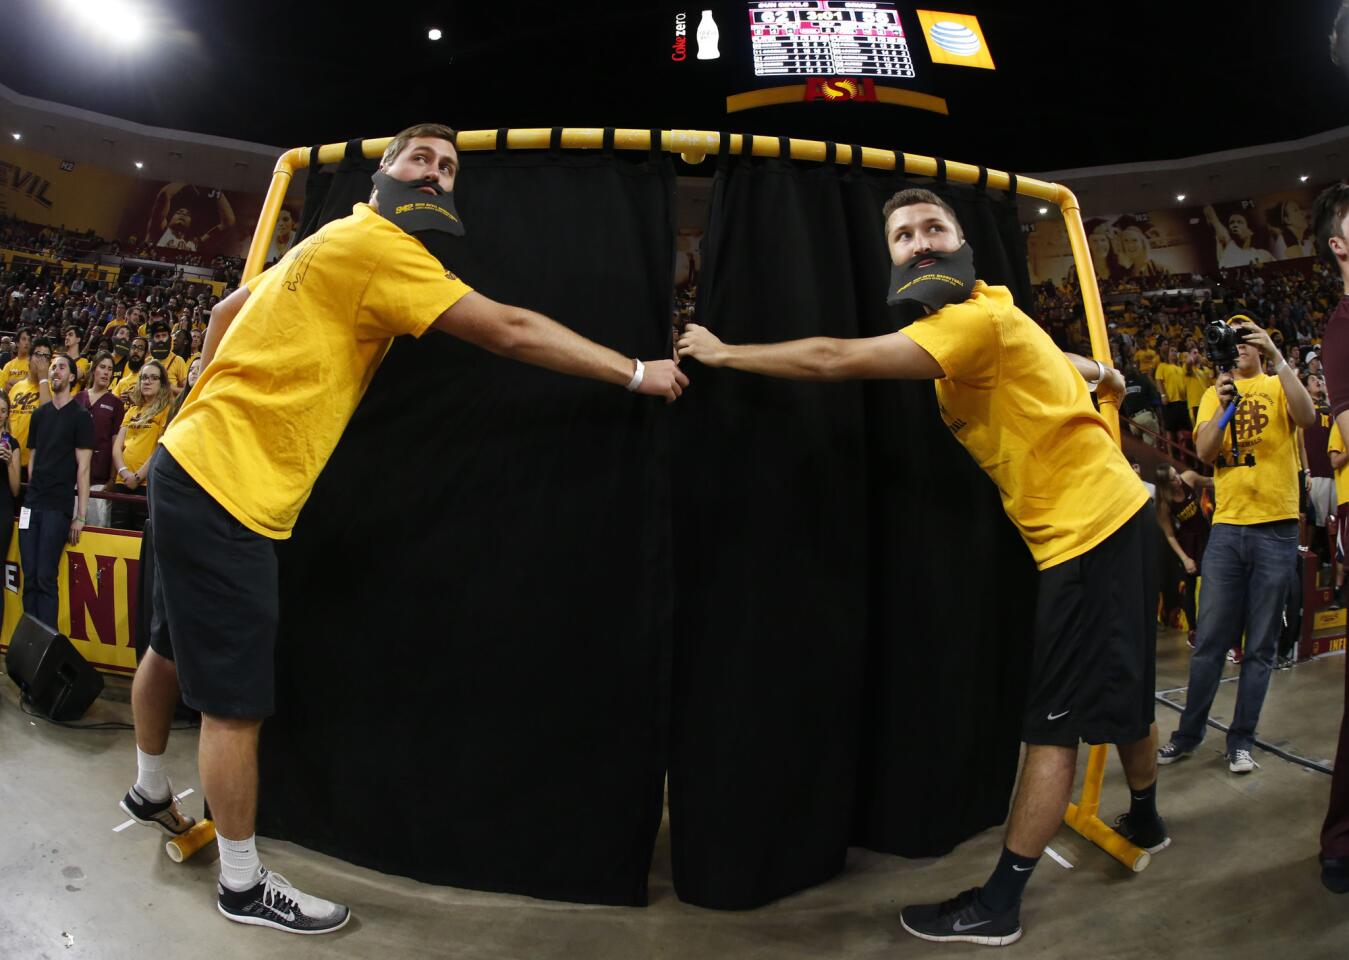 Arizona State fans prepare to unveil their Curtain of Distraction during the second half of a game against UCLA on Feb. 18 in Tempe, Ariz.